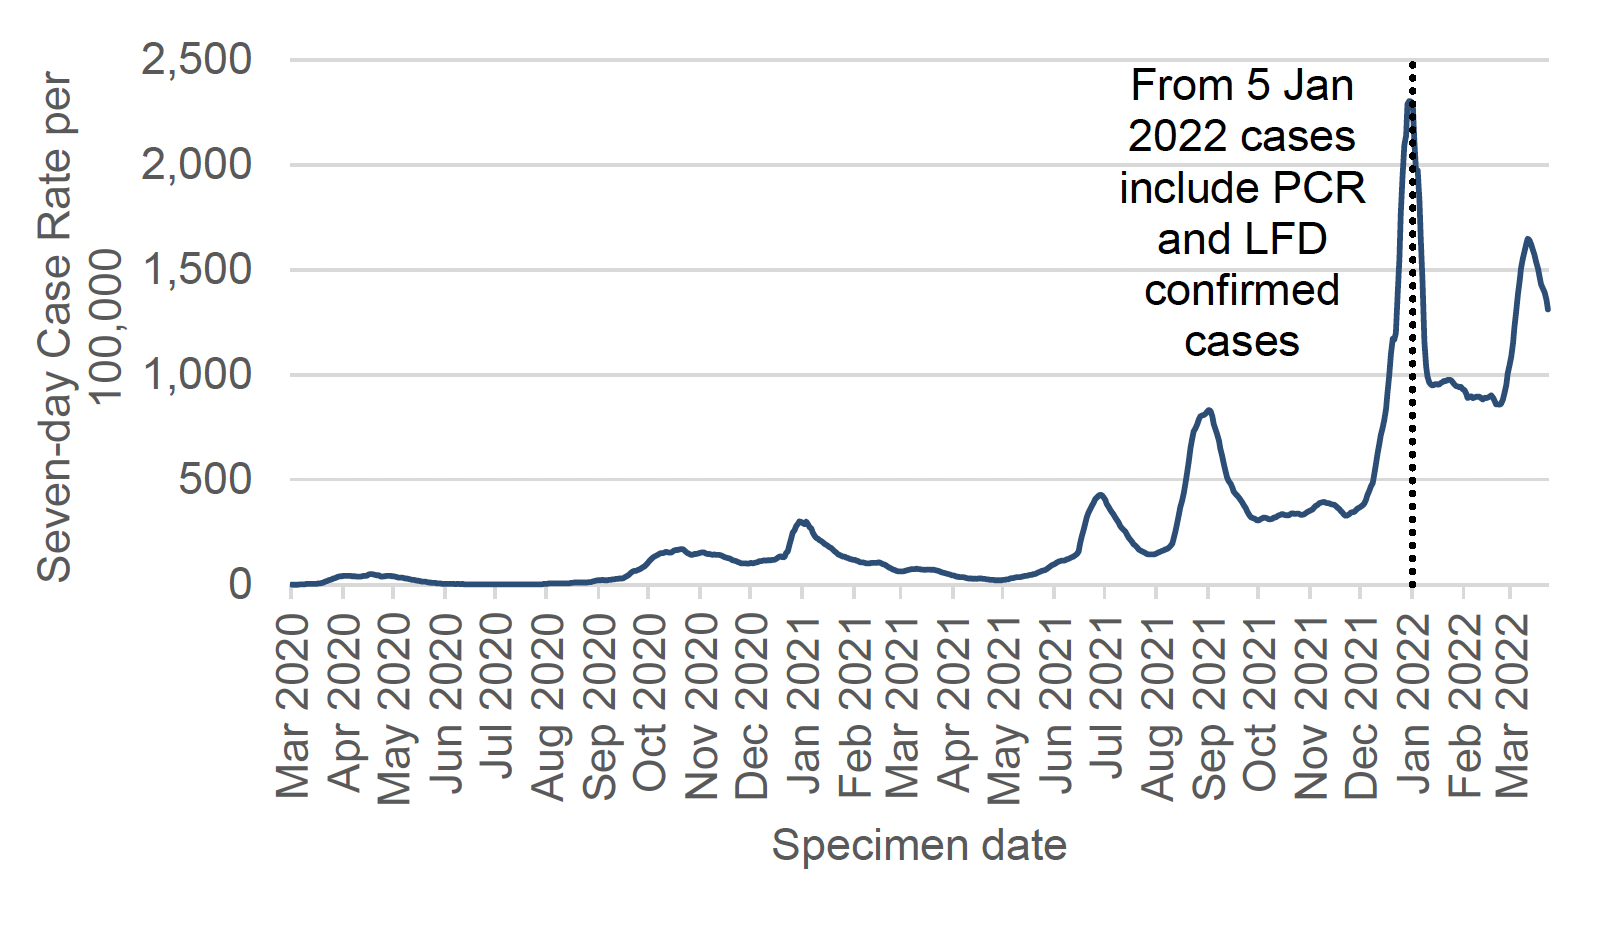 a line graph showing the seven-day case rate (including reinfections) by specimen date per 100,000 people in Scotland, using data from March 2020 up to and including March 2022. In this period, weekly case rates have peaked in January 2021, July 2021, September 2021 and early January 2022. There is a sharp increase visible from early March 2022 until mid-March followed by a slight downturn in the week leading up to 27 March 2022. The chart has a note that says: “from 5 January 2022 cases include PCR and LFD confirmed cases”. Before 5 January 2022, the case rate includes only PCR confirmed cases.